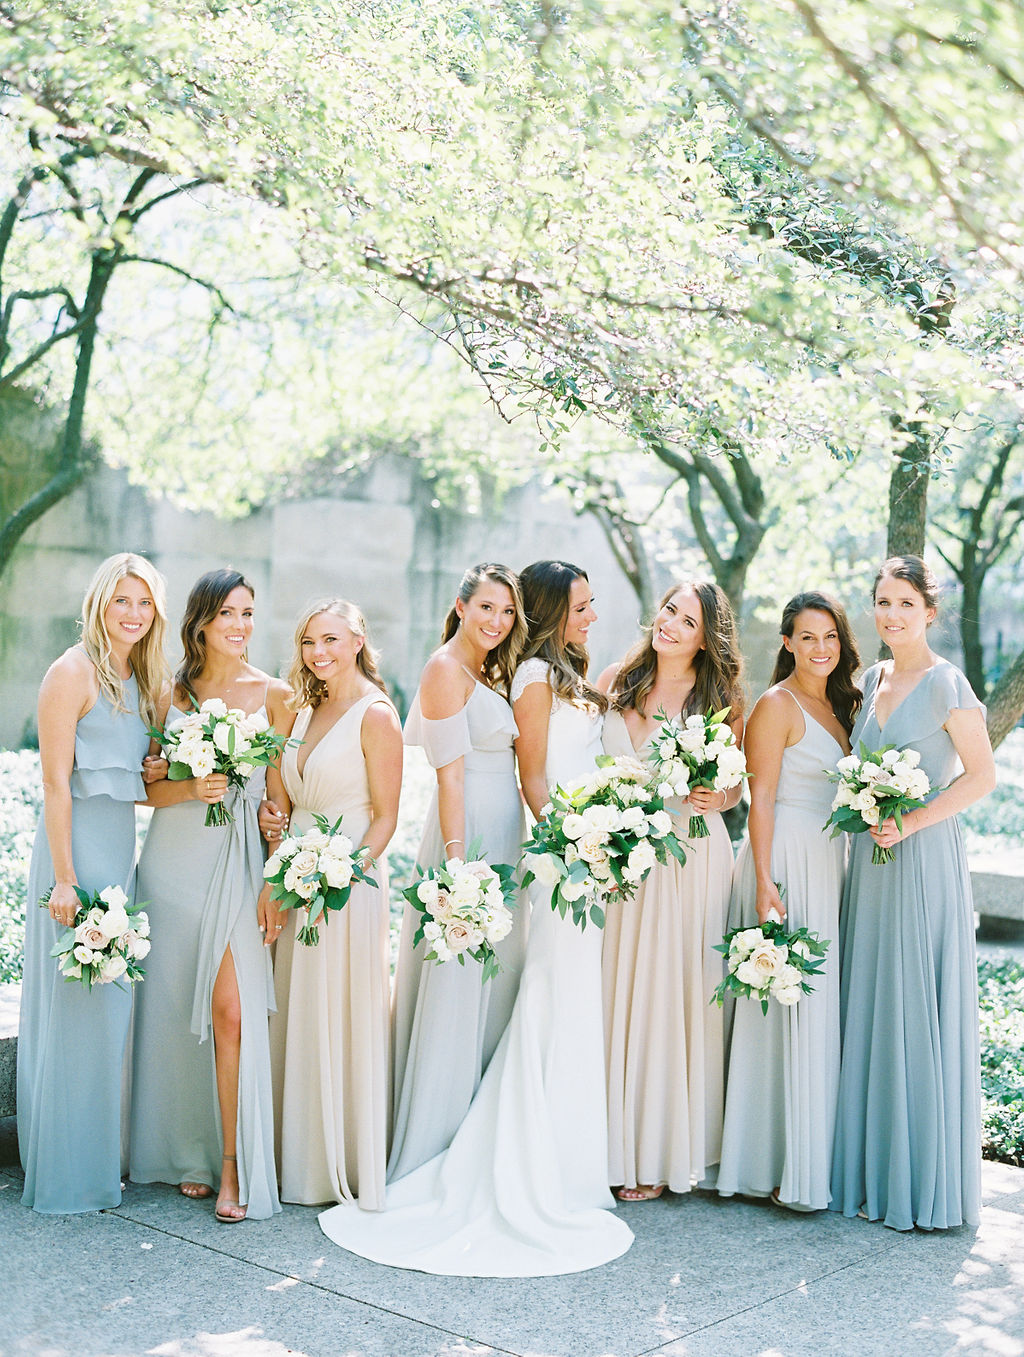 Outdoor Wedding at Chicago Illuminating Company - Life in Bloom